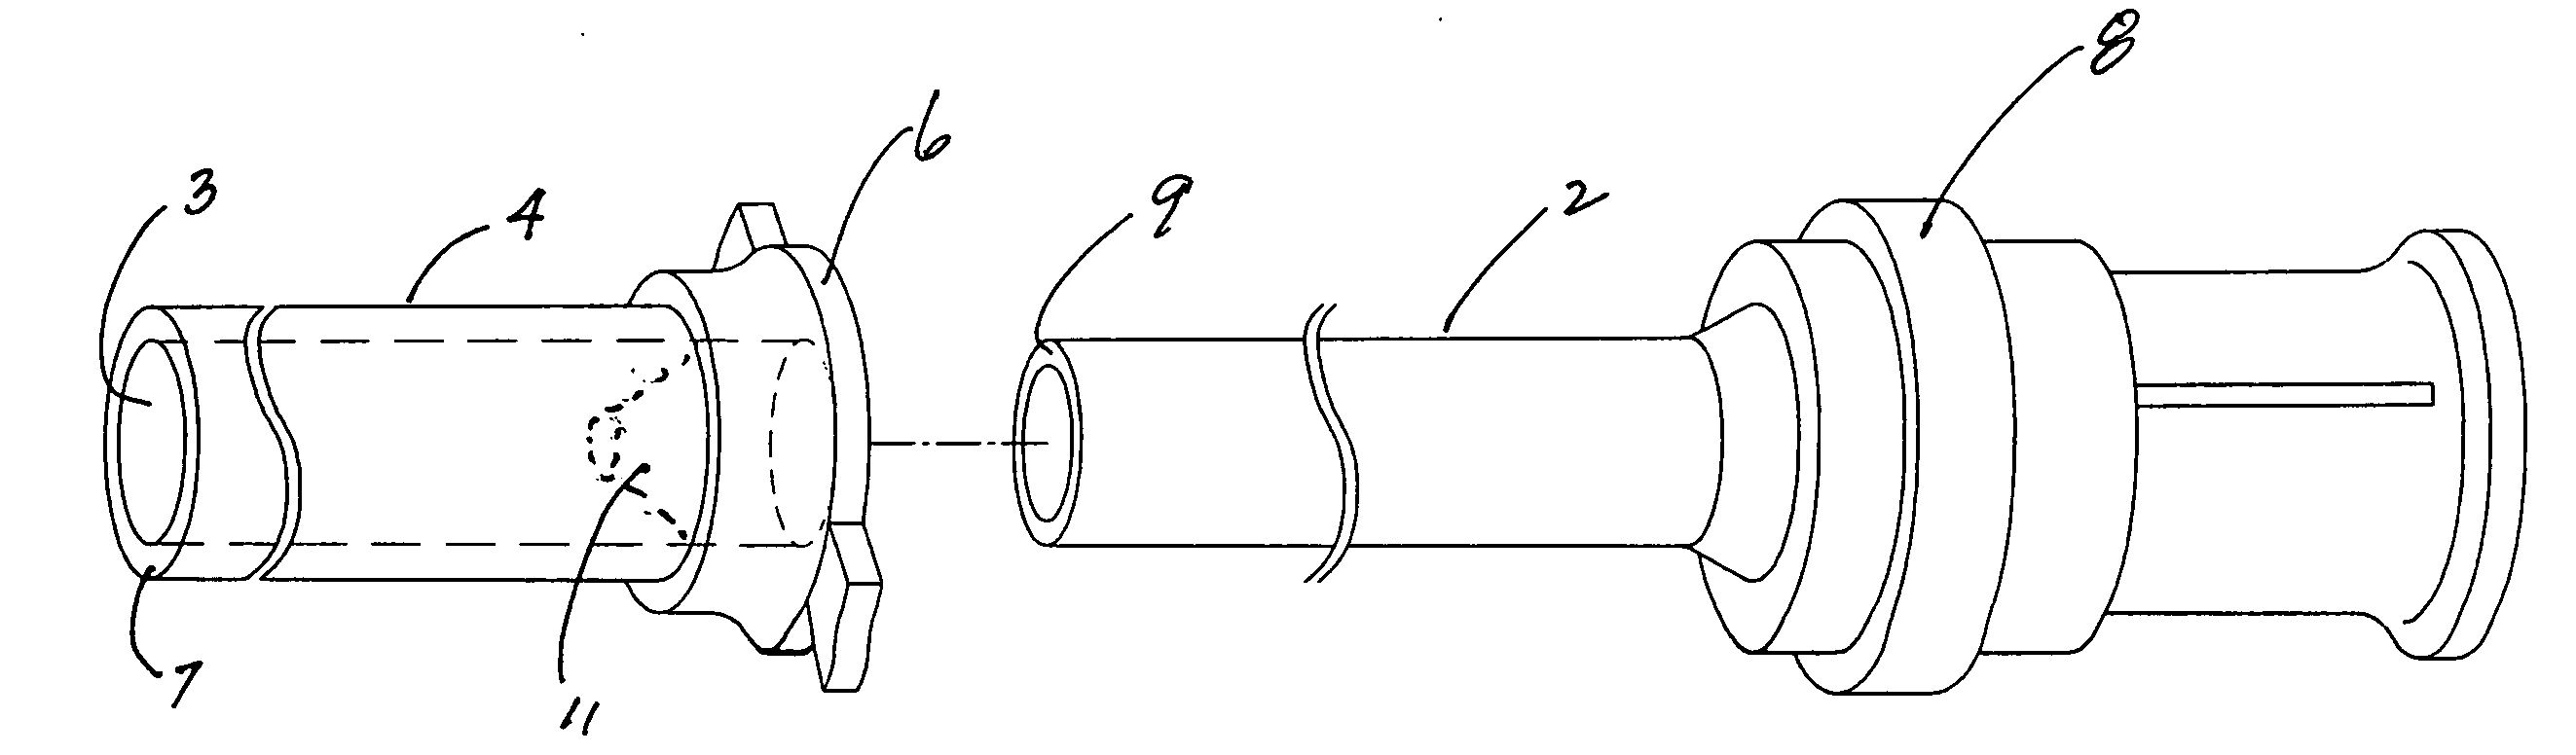 Device for shielding the lens of a flexible or rigid surgical endoscope